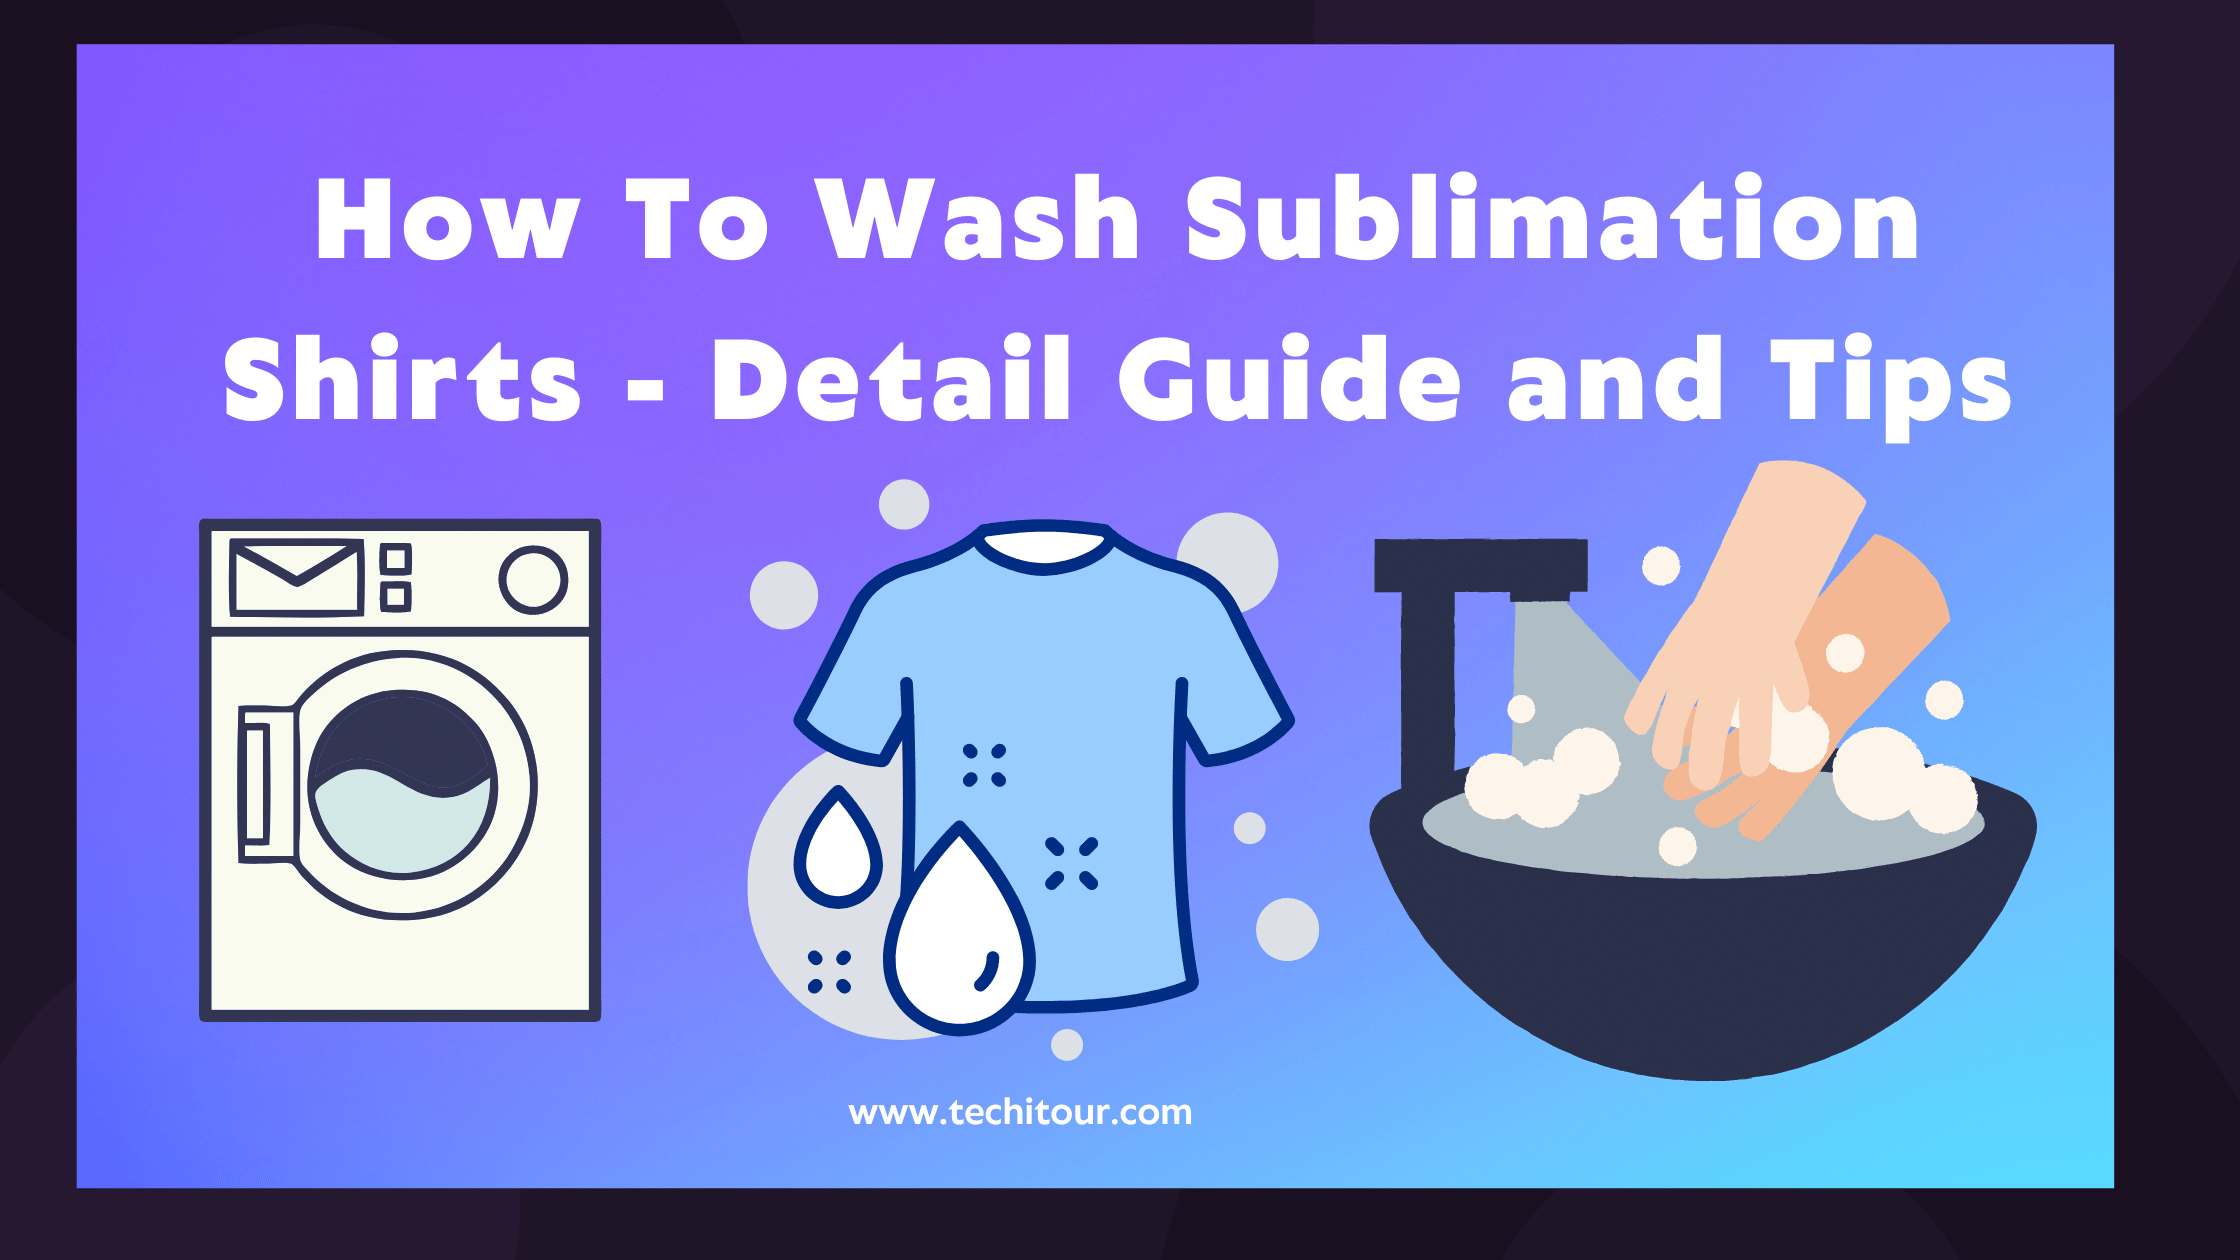 How To Wash Sublimation Shirts